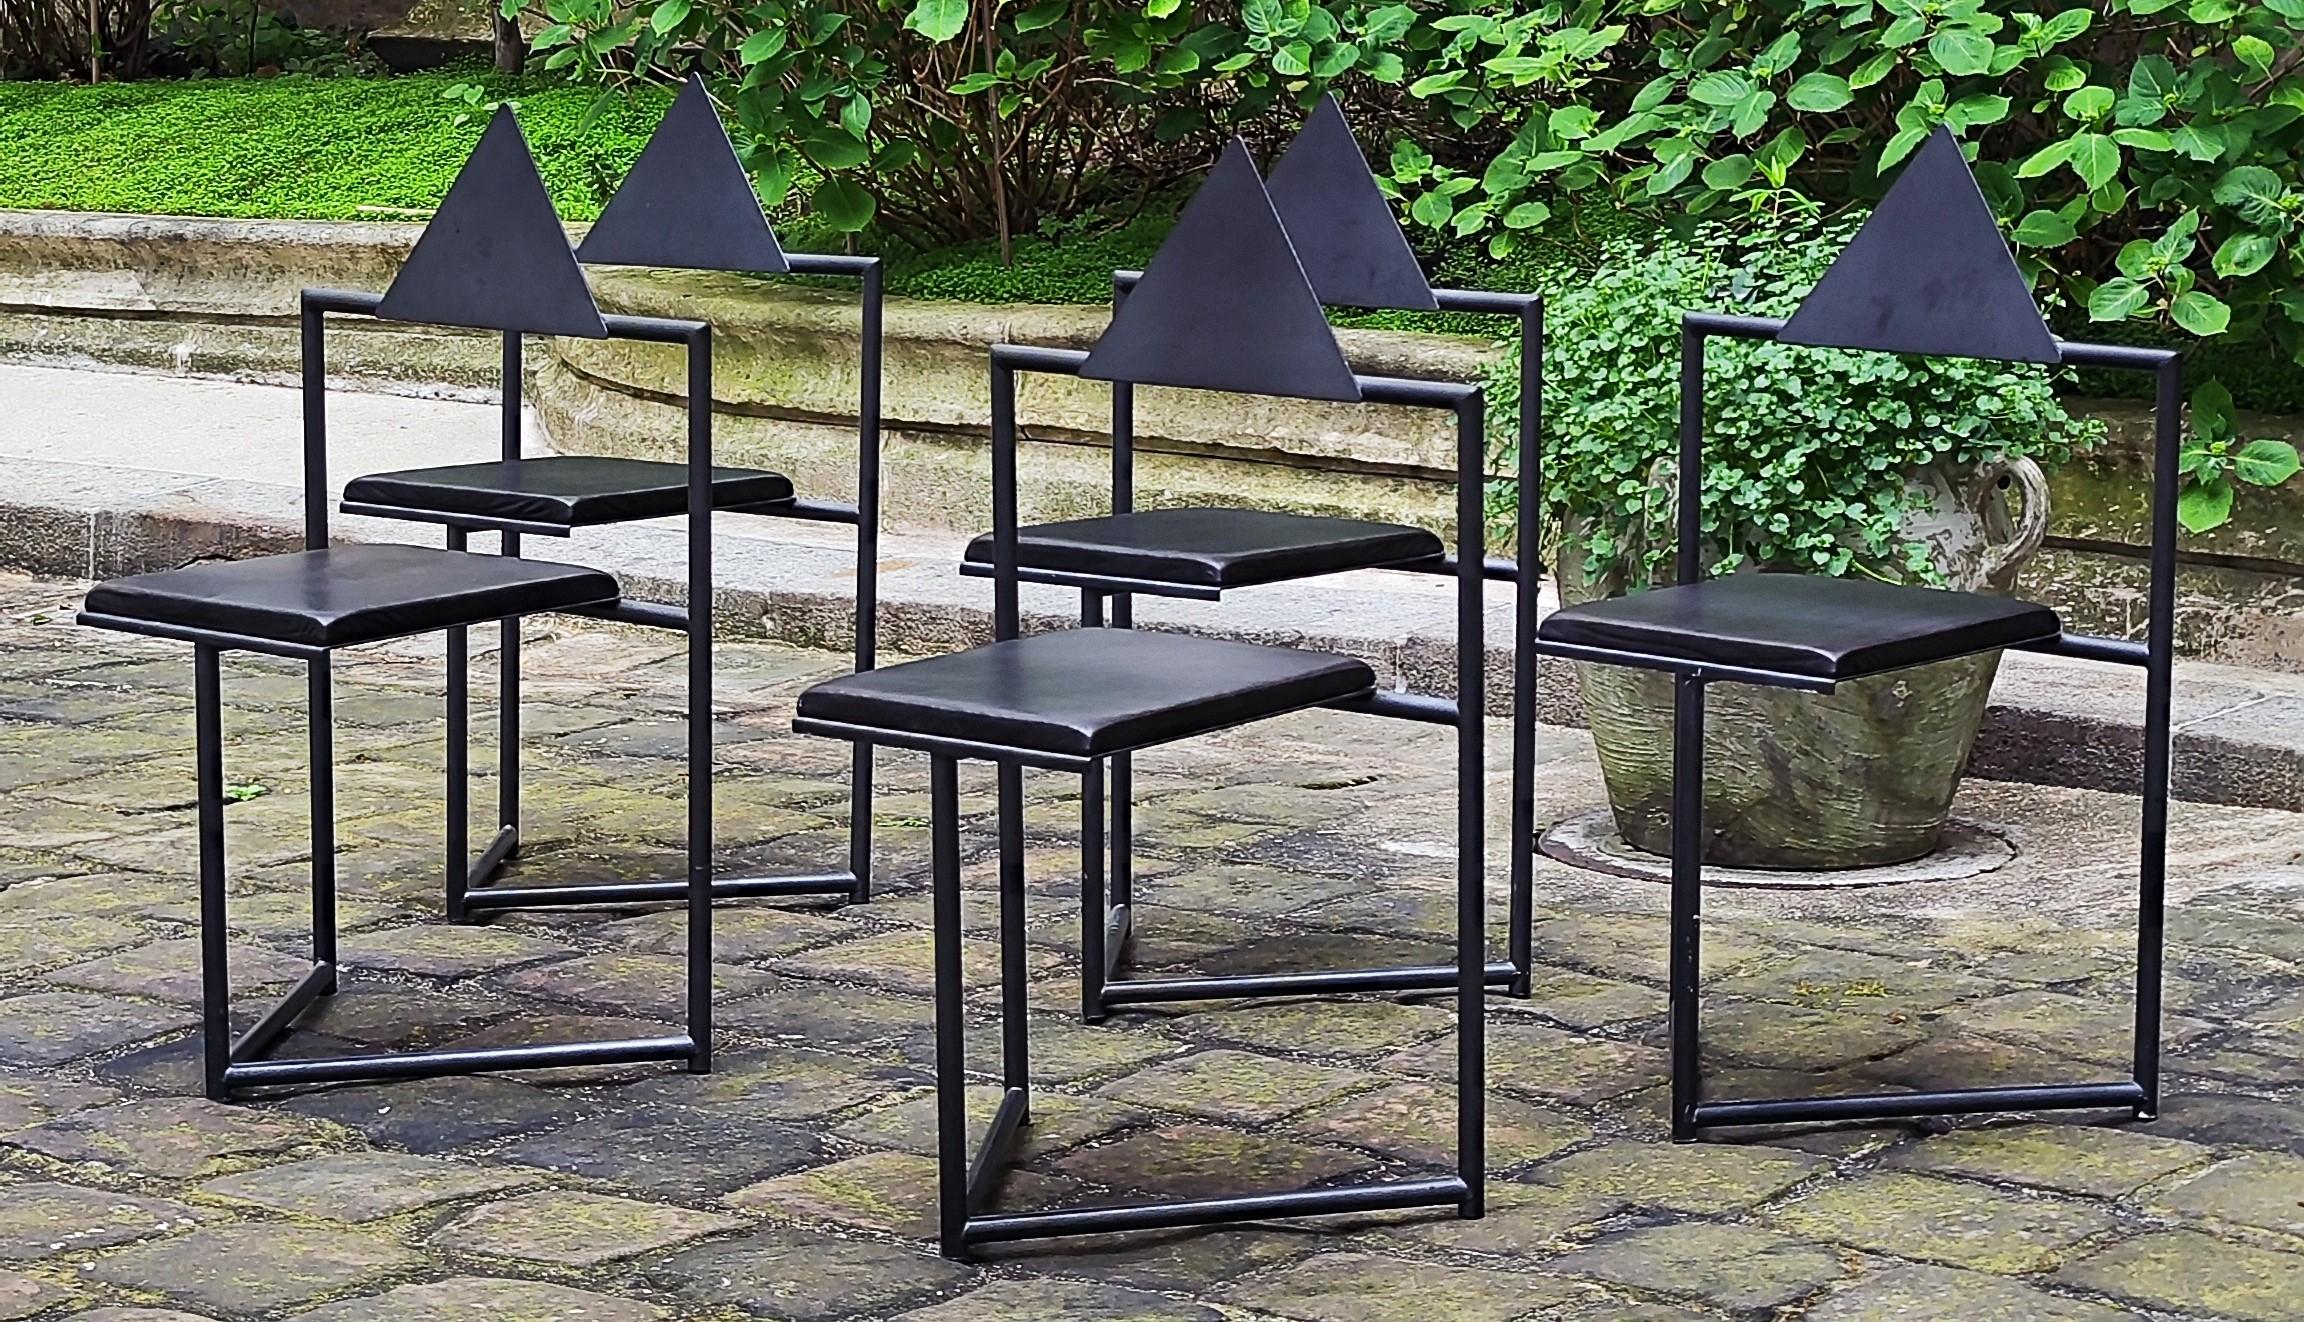 5 Chairs, 1980s steel and leather that might be by Mario Botta or Martin Szekely For Sale 10